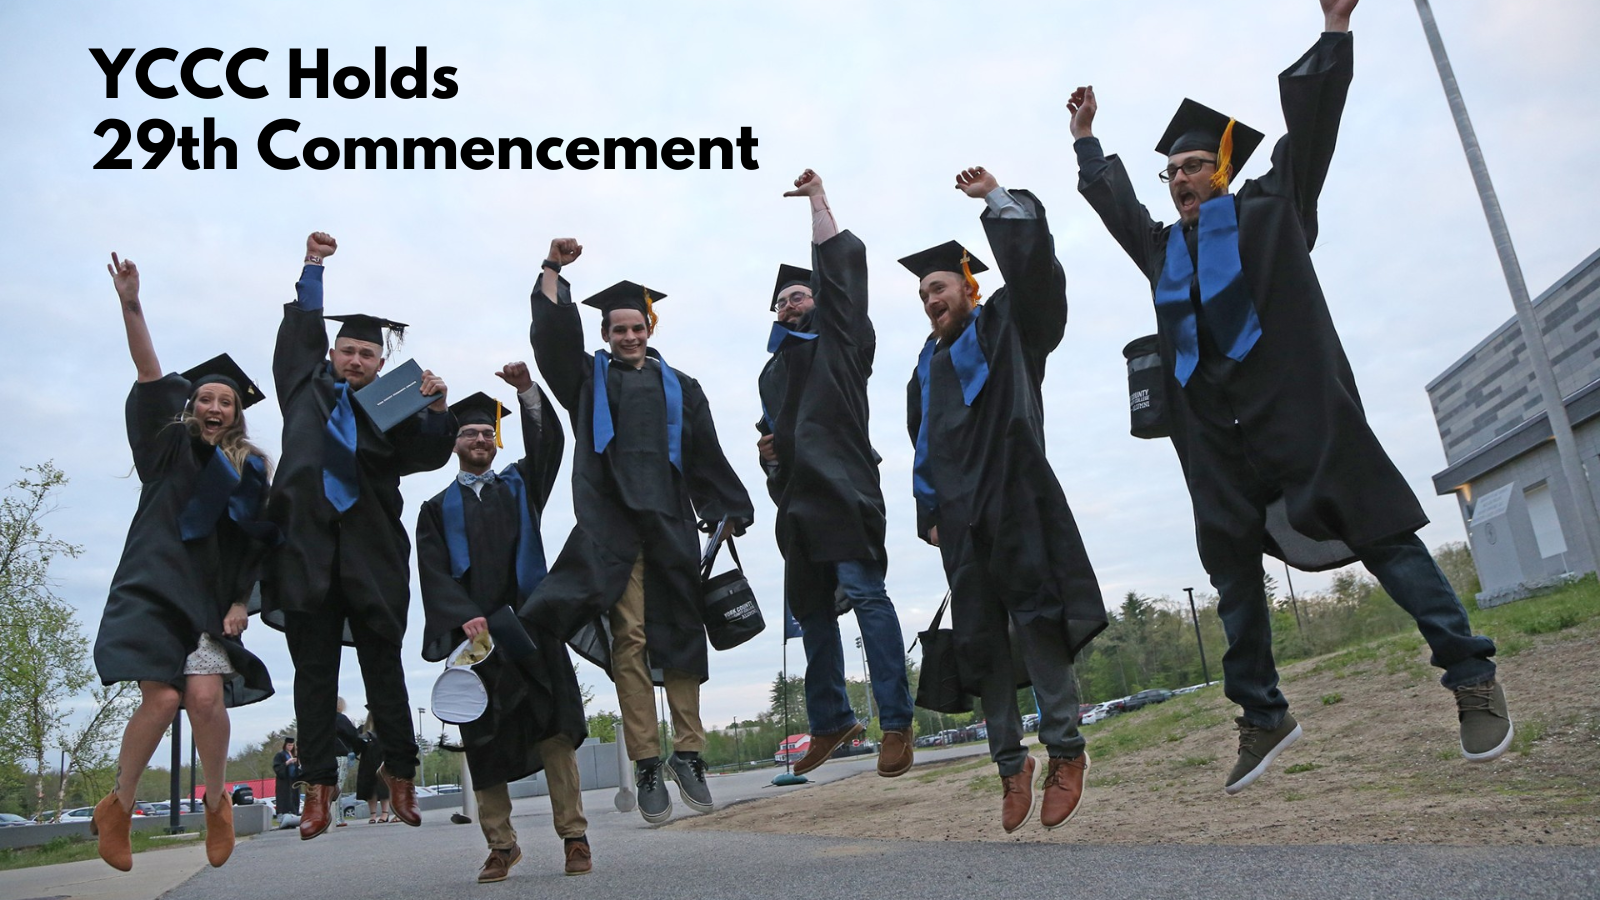 YCCC Holds 29th Commencement